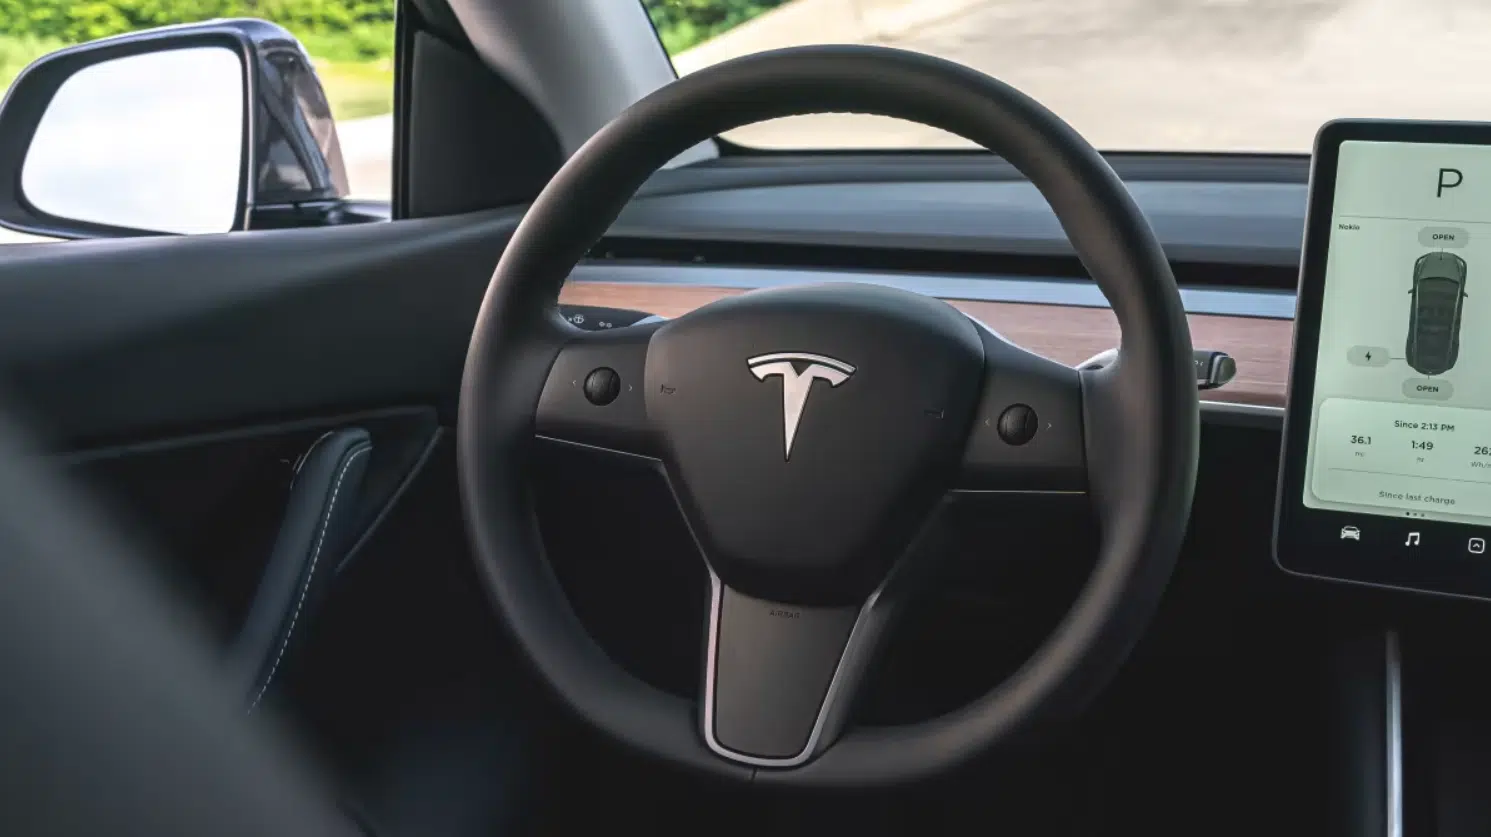 Tesla employees secretly release “intimate” recordings from car cameras